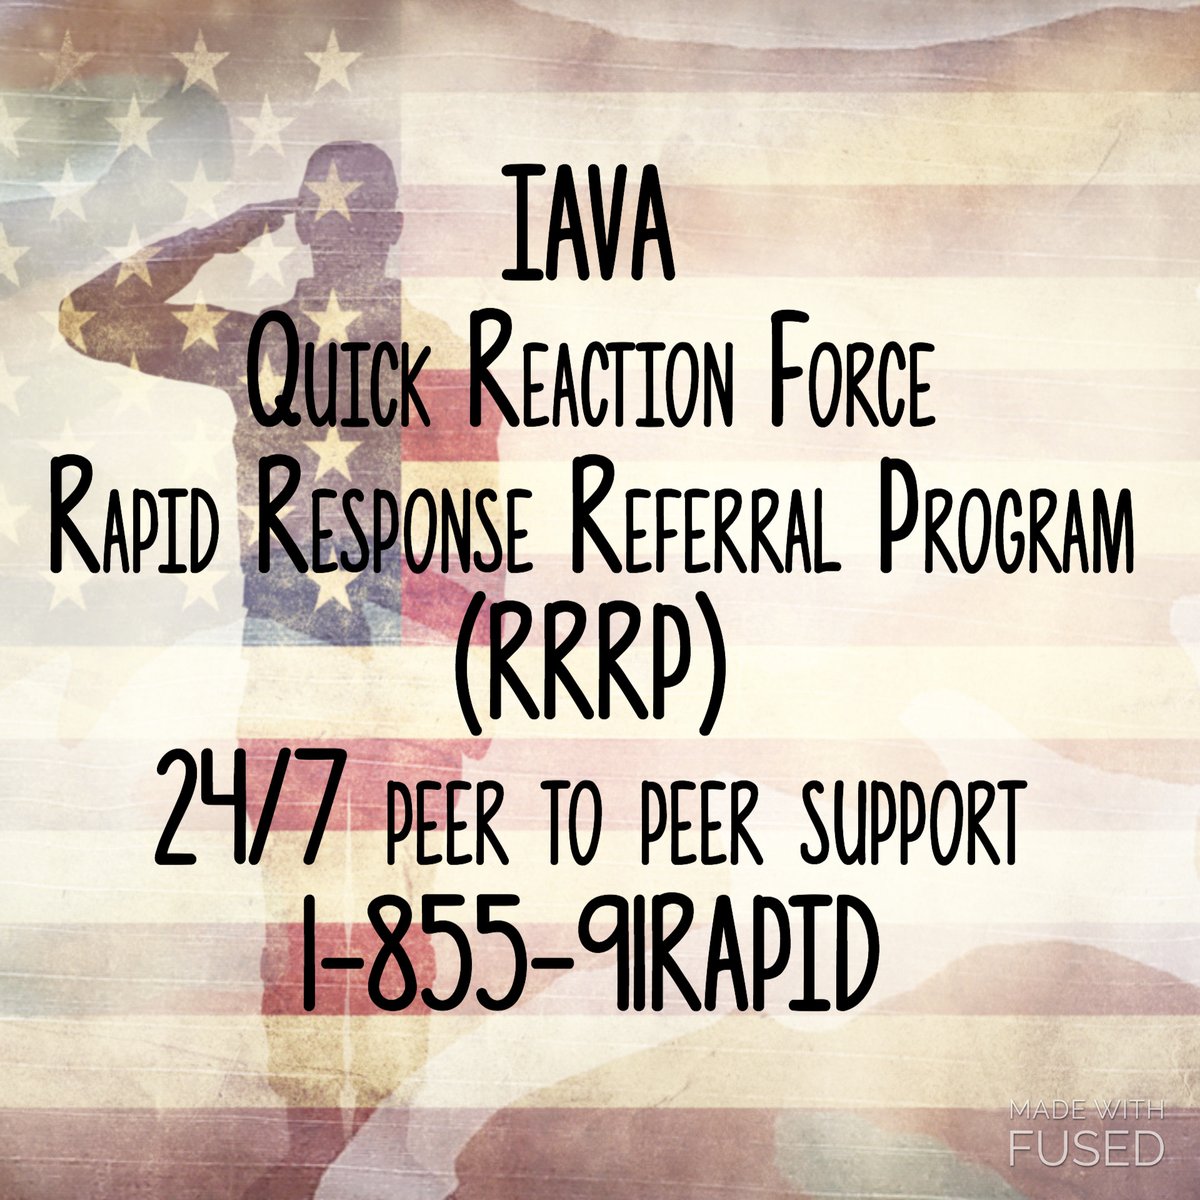 4/ IAVA’s Quick Reaction Force, a Rapid Response Referral Program, provides confidential 24/7 peer to peer support, comprehensive care management and resource connections.To get connected to a Veteran Care Manager today, please call 1-855-91RAPID.